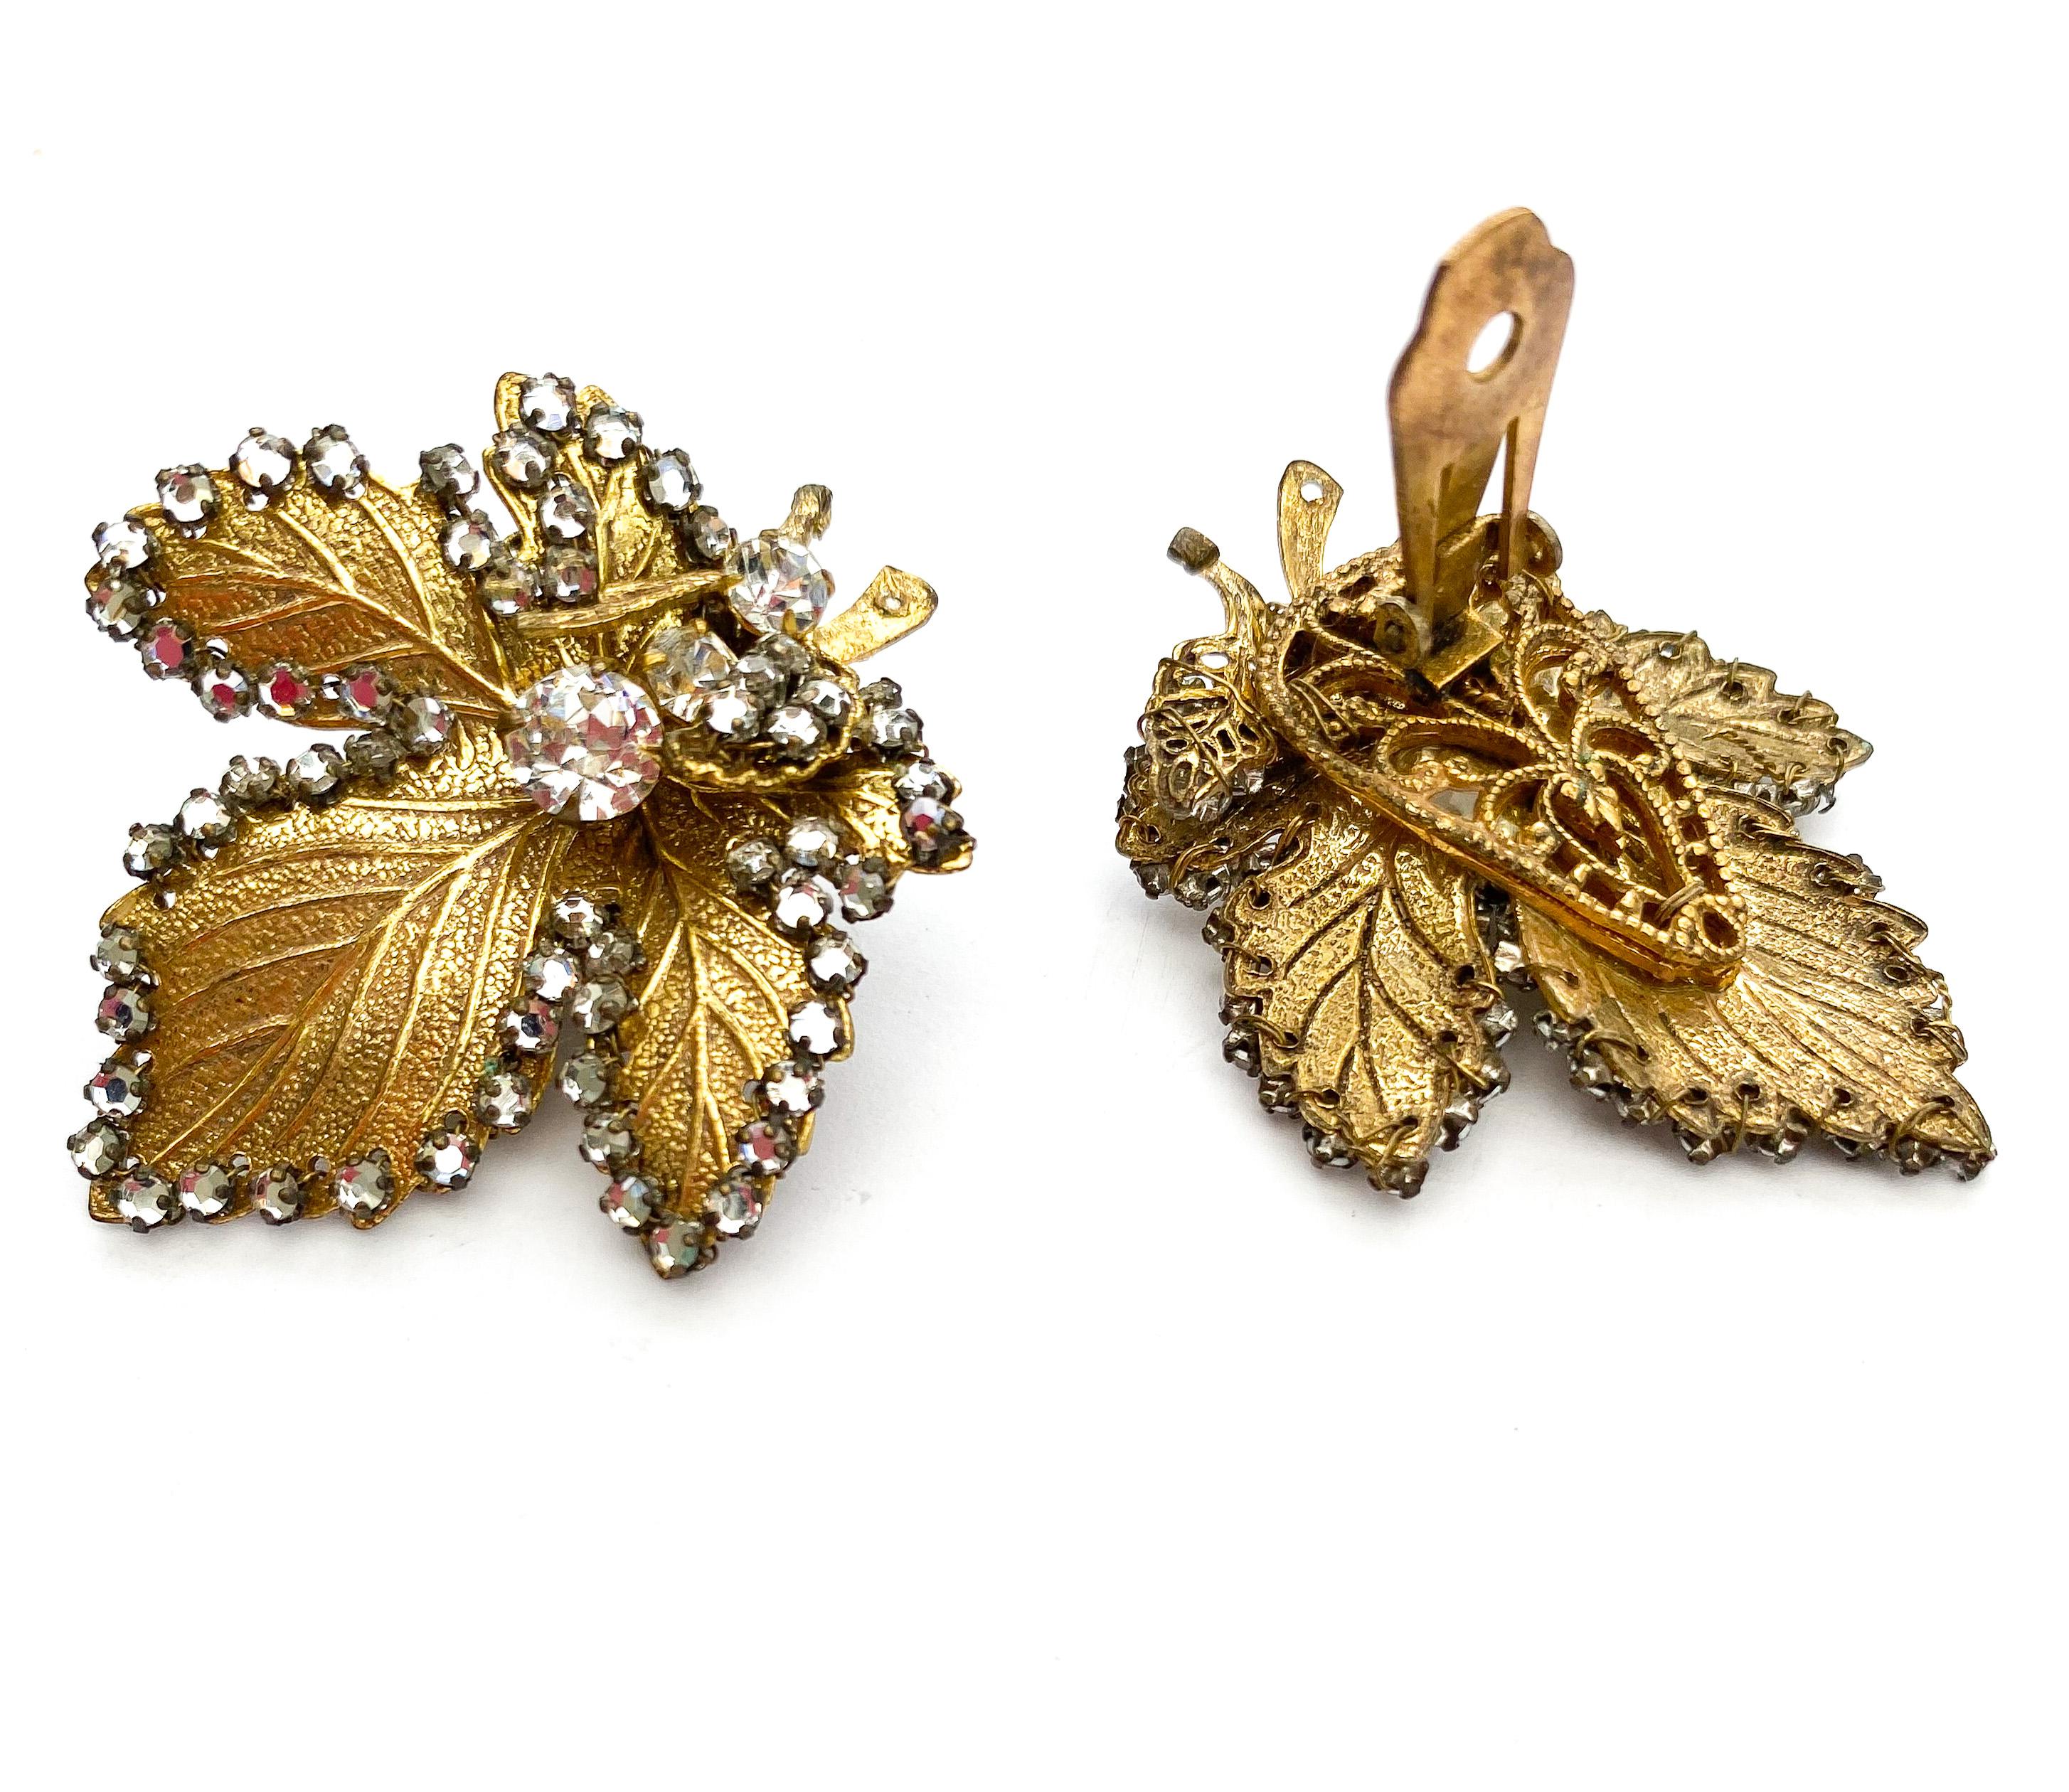 A beautiful and rich gilded metal earring in the form of a sycamore or maple leaf. Designed by Robert Clark for Miram Haskell in the early 1960s, these large, elegant earrings are decorated with rose montes (flat back pastes set on a wire and claw